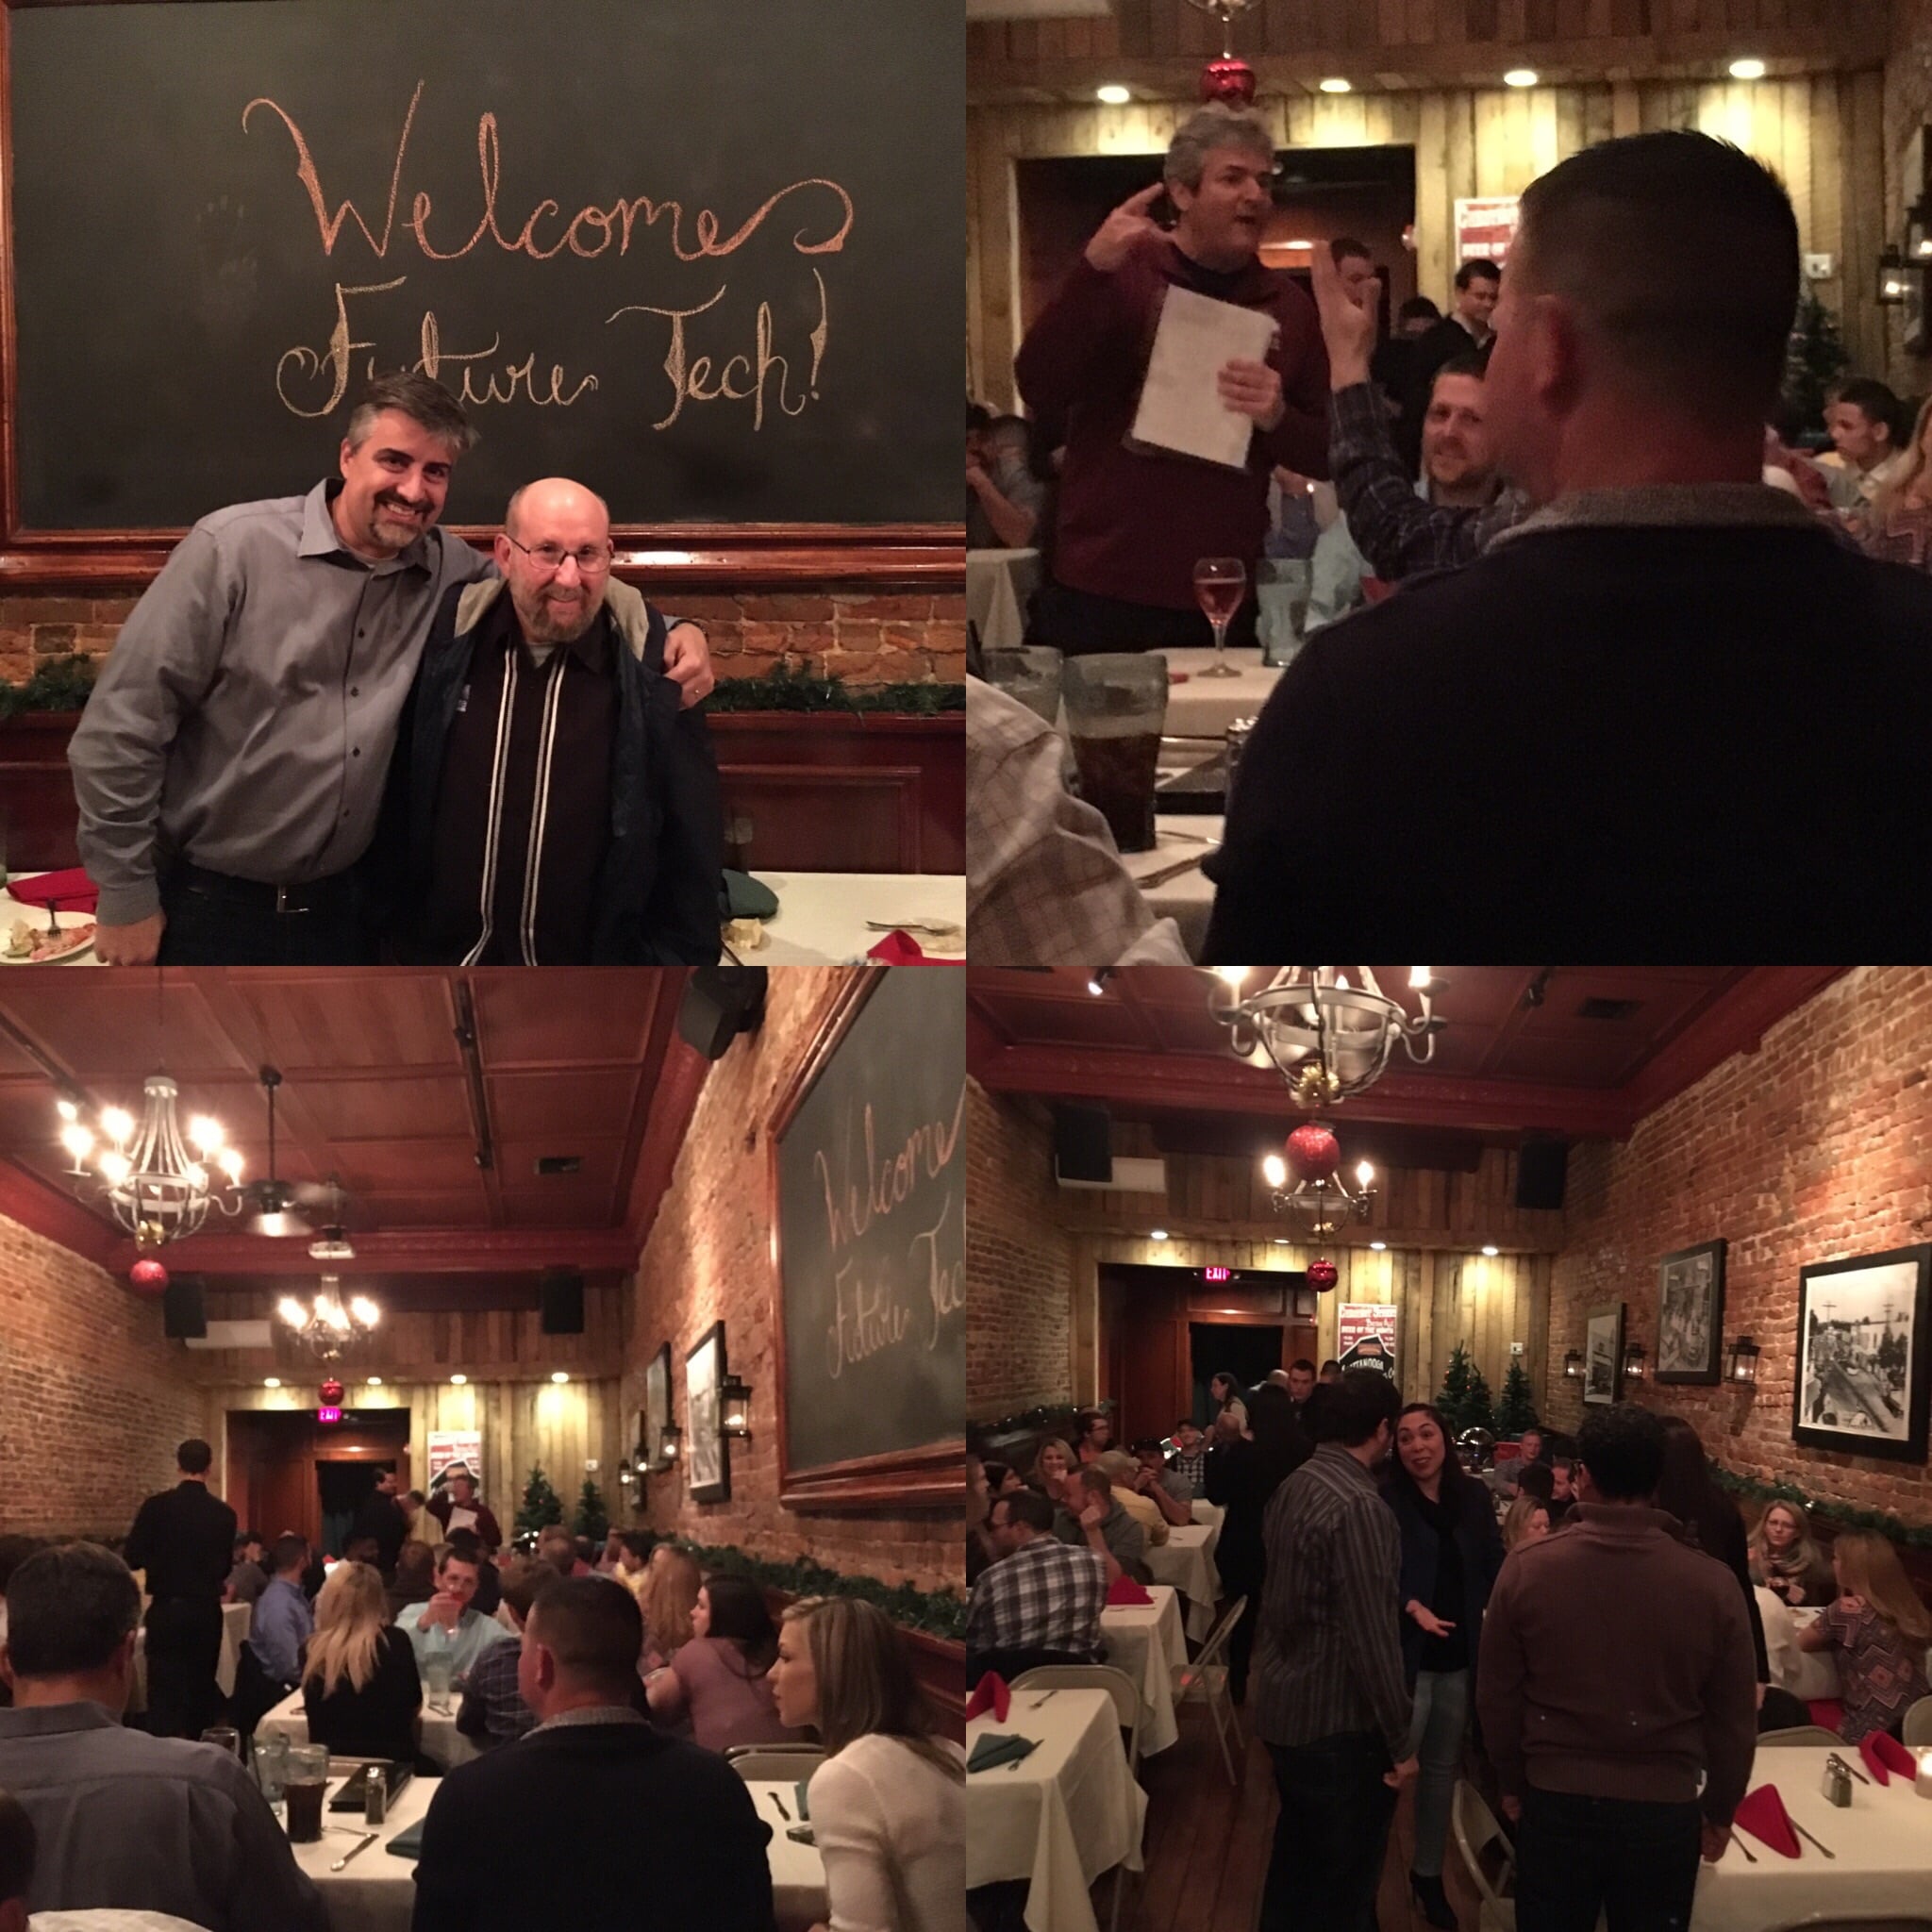 Fun was had by all at Future Tech's holiday party last week. Great chance to celebrate another successful year.&nbsp;